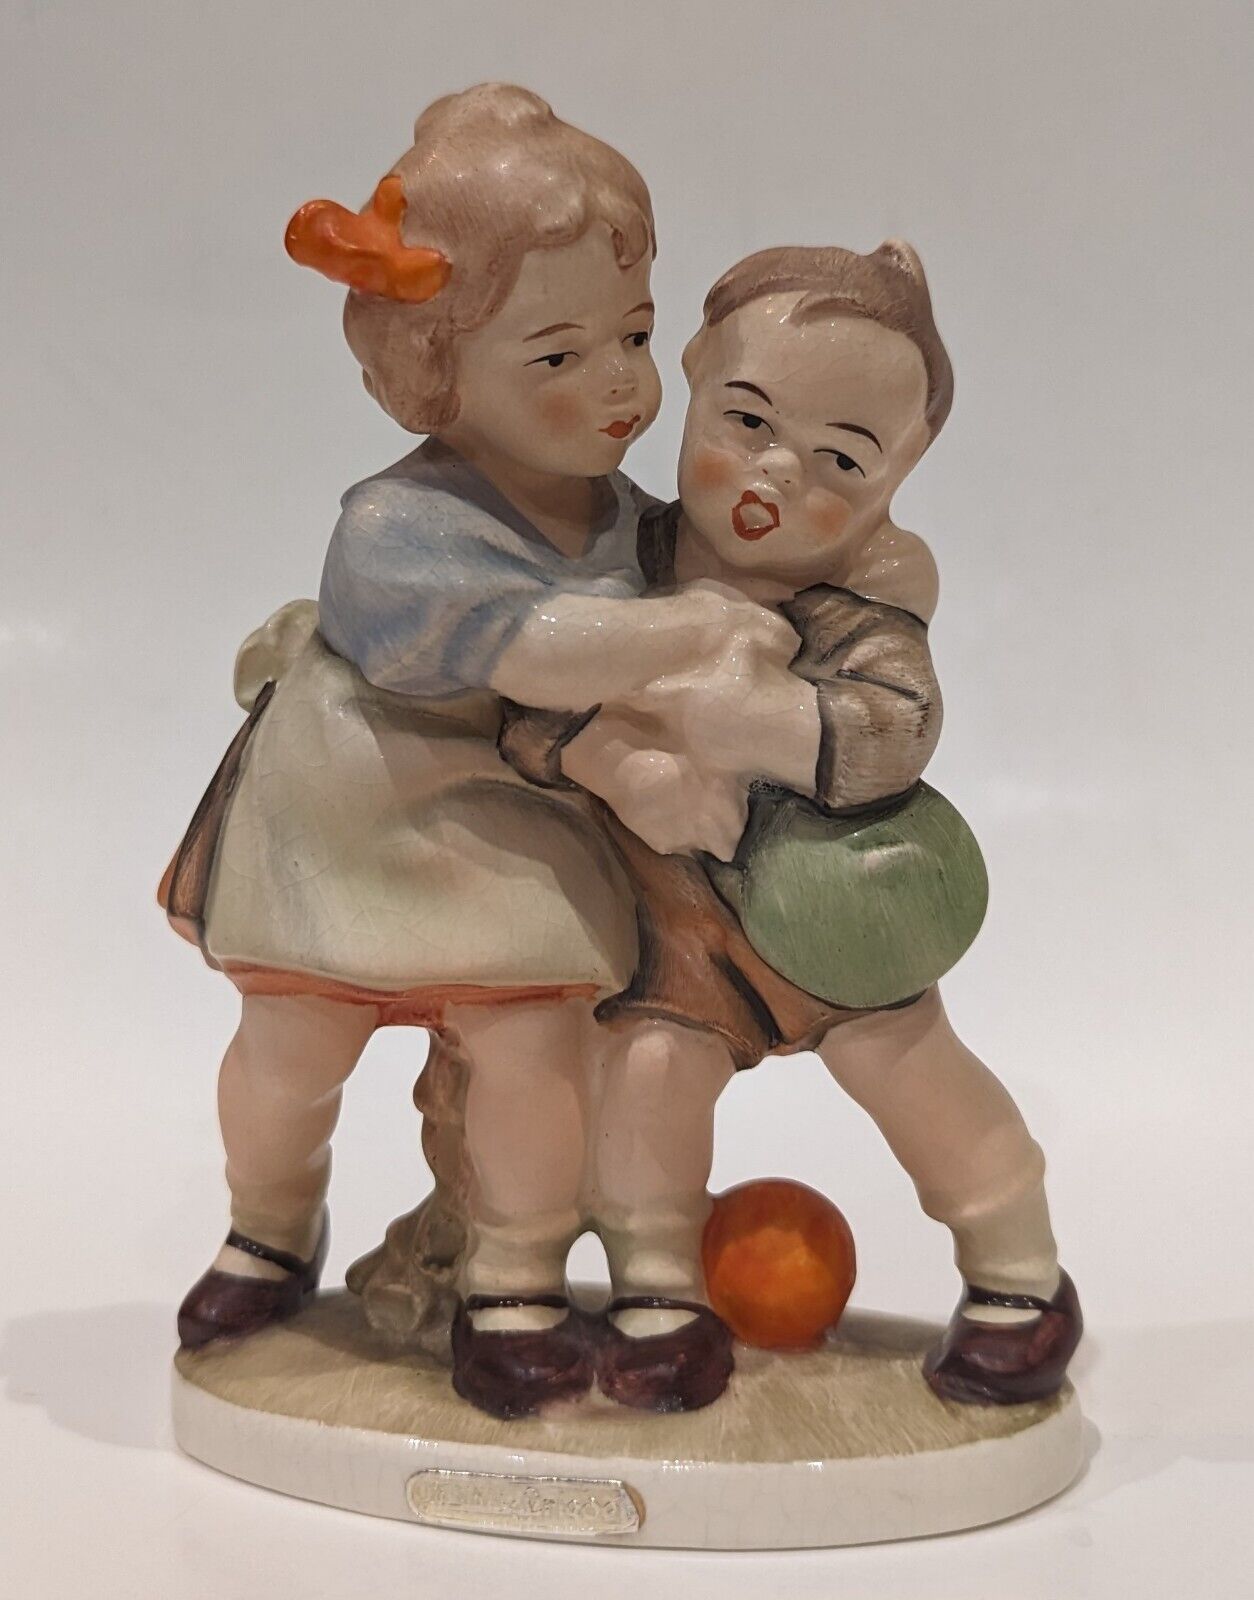 RARE Find, Vintage Friedel Figurine, Girl & Boy Playing, Germany US Zone, 5.5\